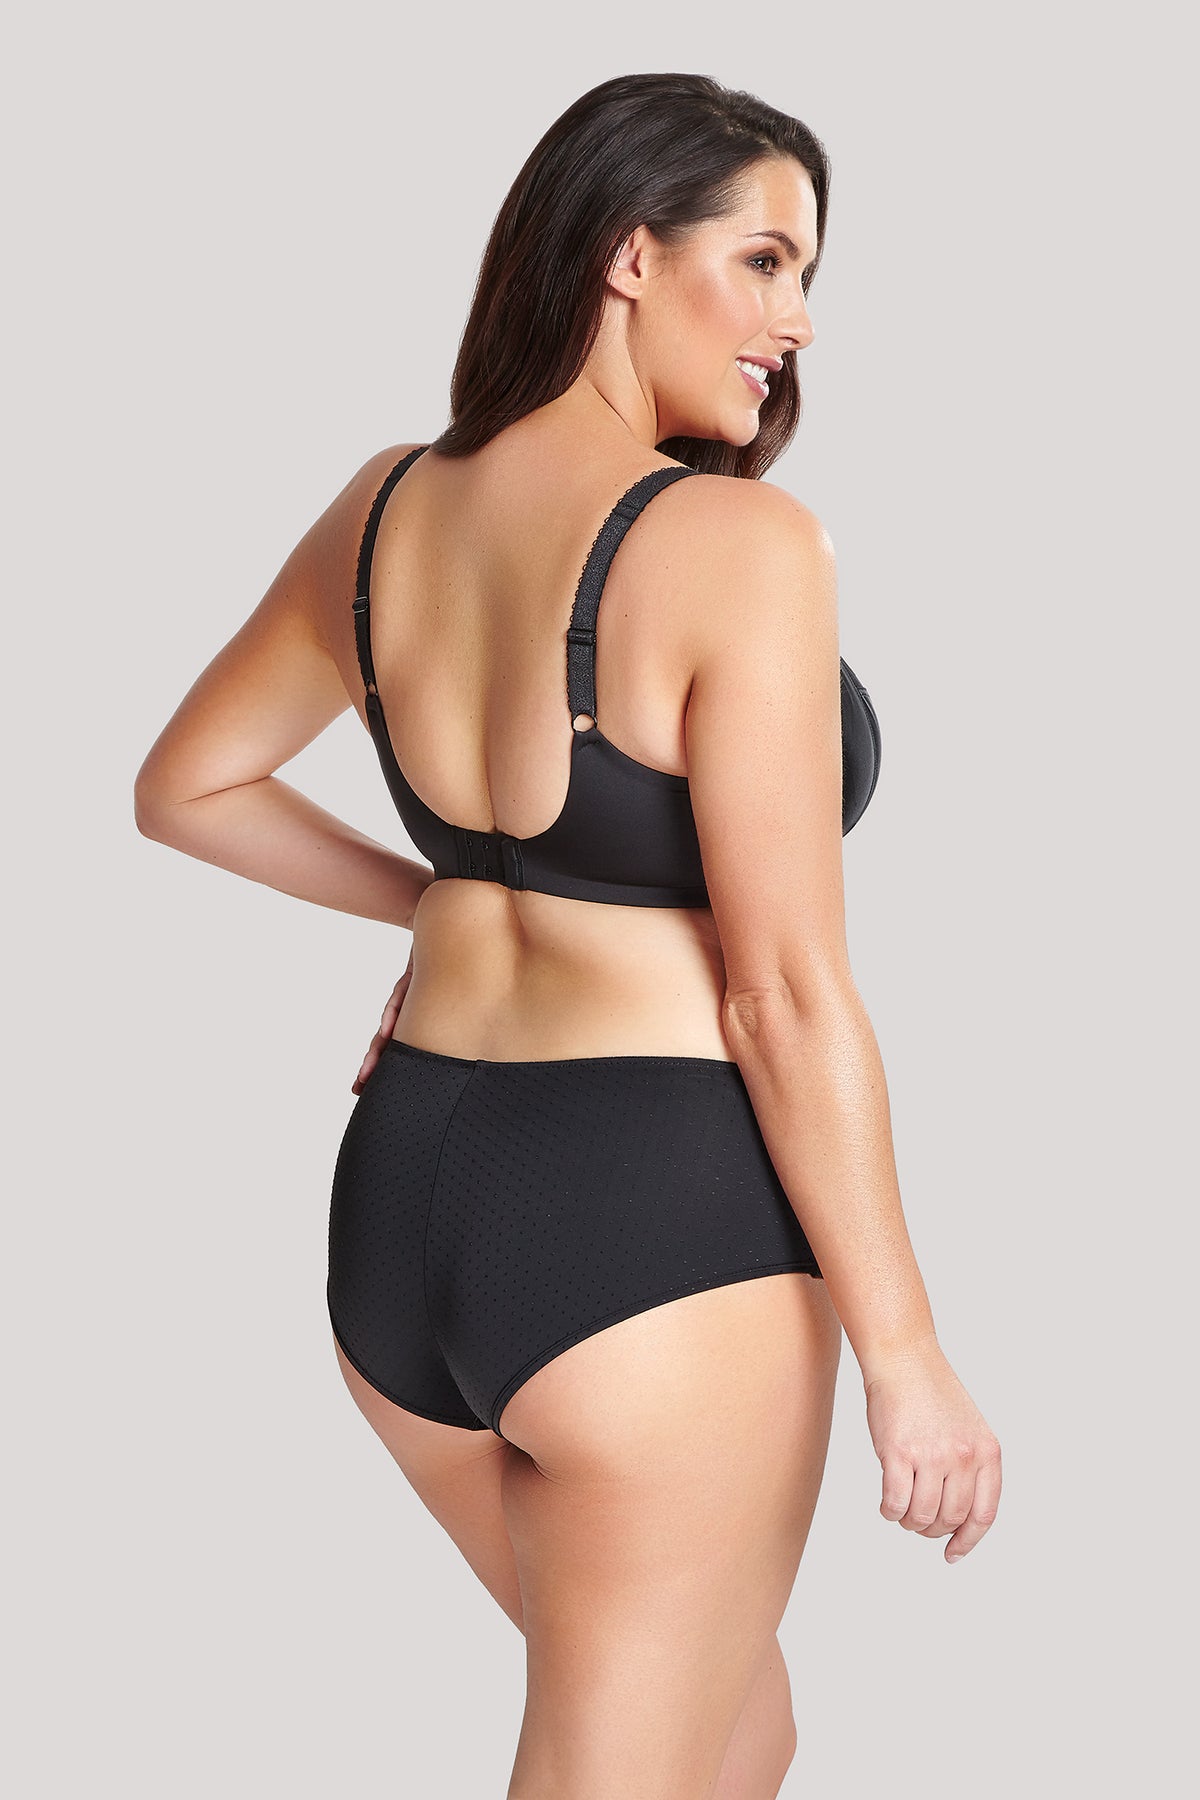 Panache Candi Full Cup Non Padded Wired Bra and Maxi Briefs Black Rear View